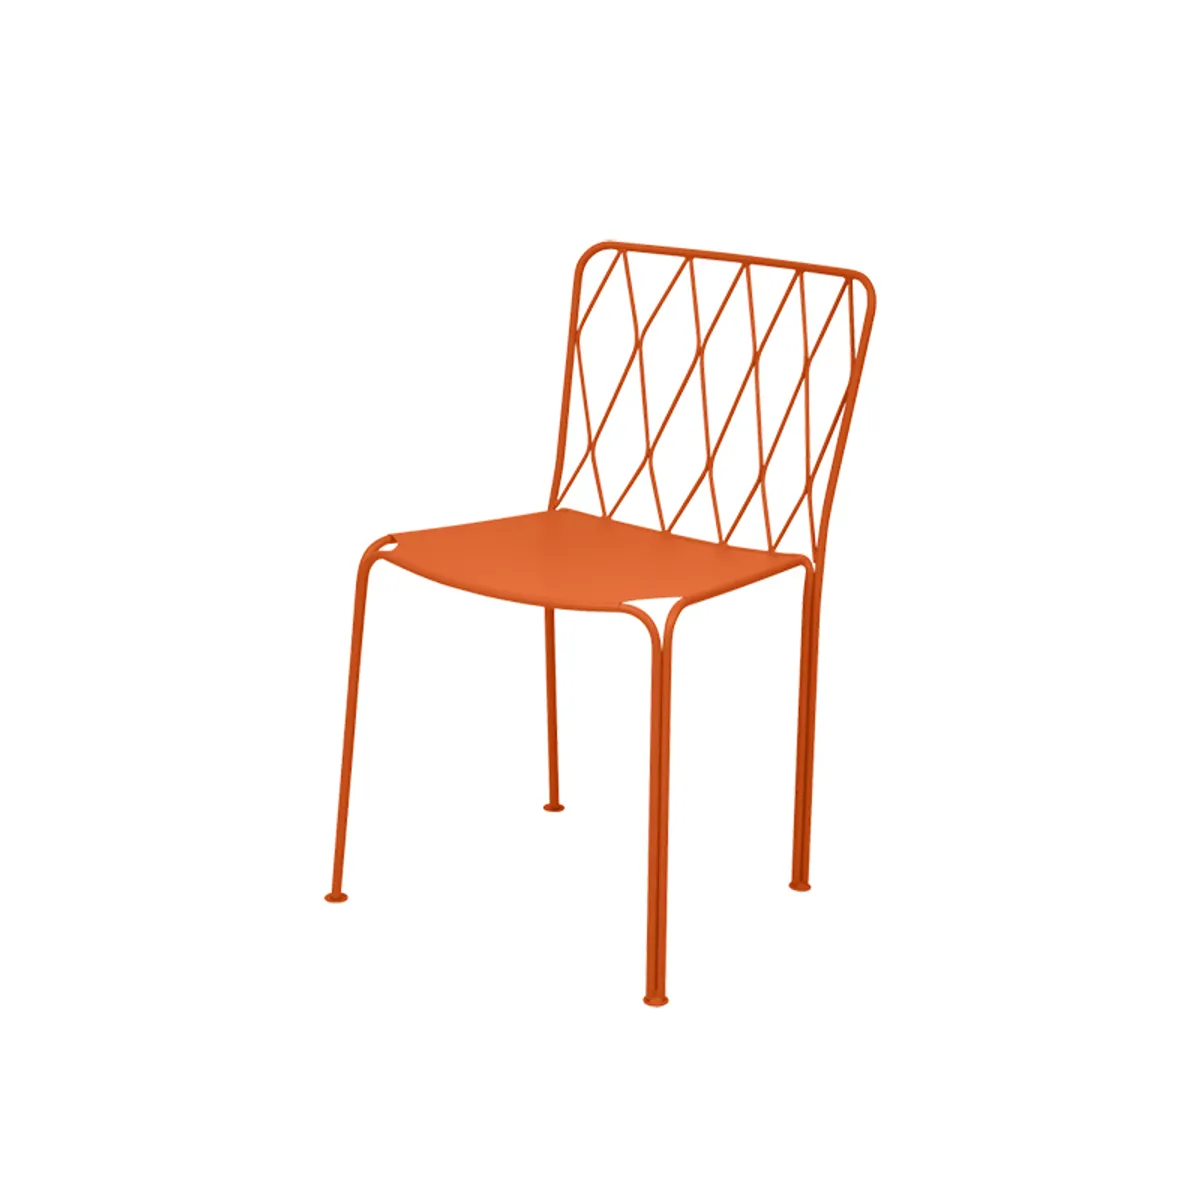 Kintbury Side Chair For Outdoors Bar And Cafe Furniture Orange